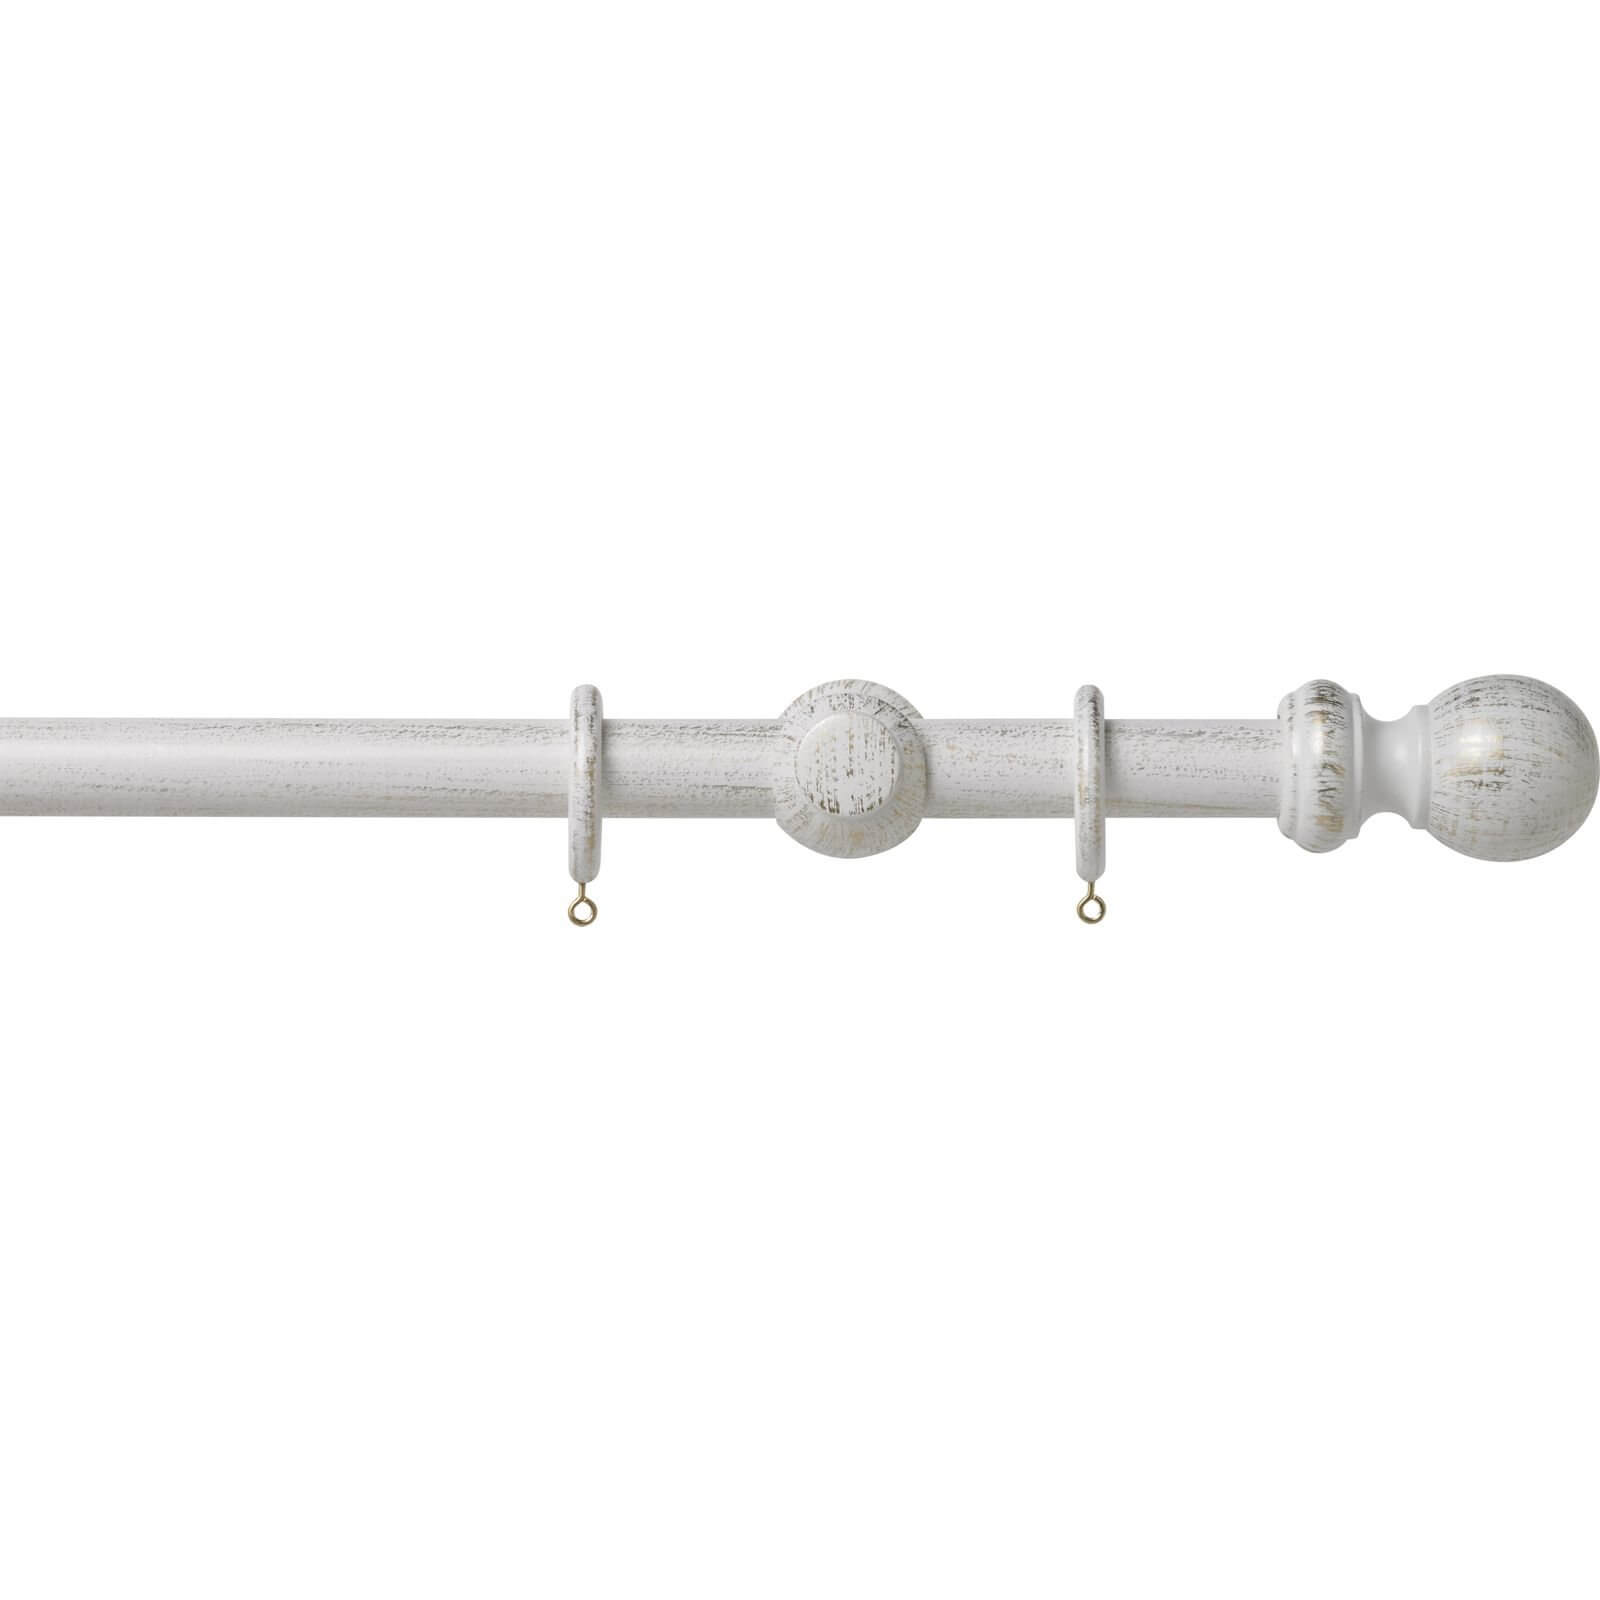 Scratched White Wood 28mm Curtain Pole with Ball Finials - 2.4m